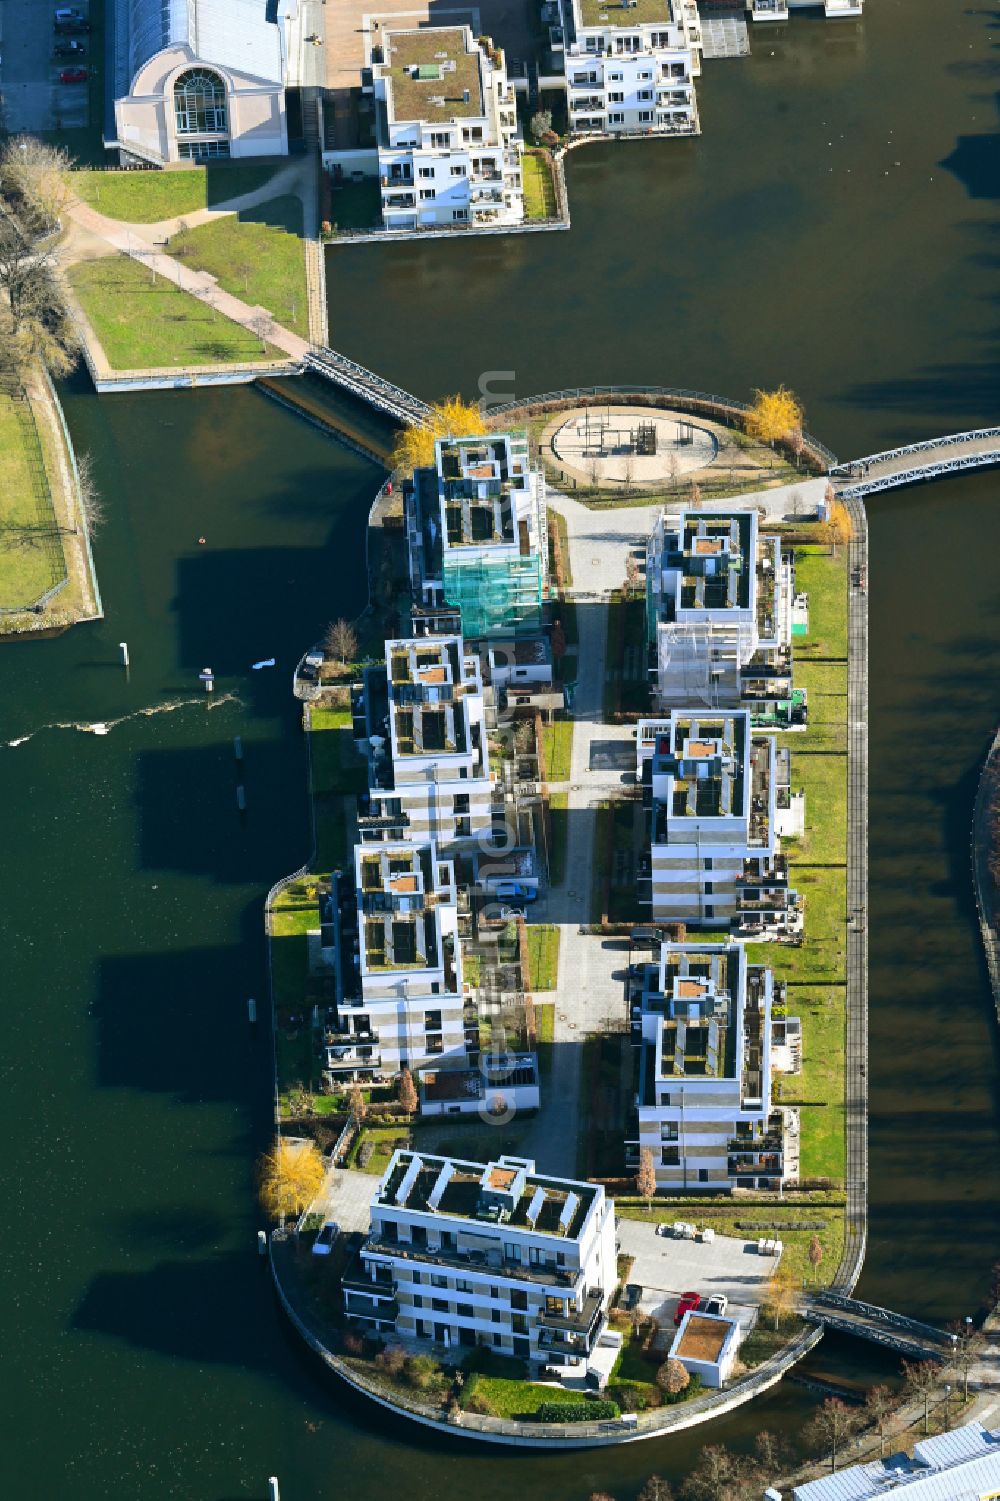 Aerial photograph Berlin - Residential area of the multi-family house settlement auf of Tegeler Insel on Tegeler Hafen in Front of the island Humboldt-Insel in the district Reinickendorf in Berlin, Germany